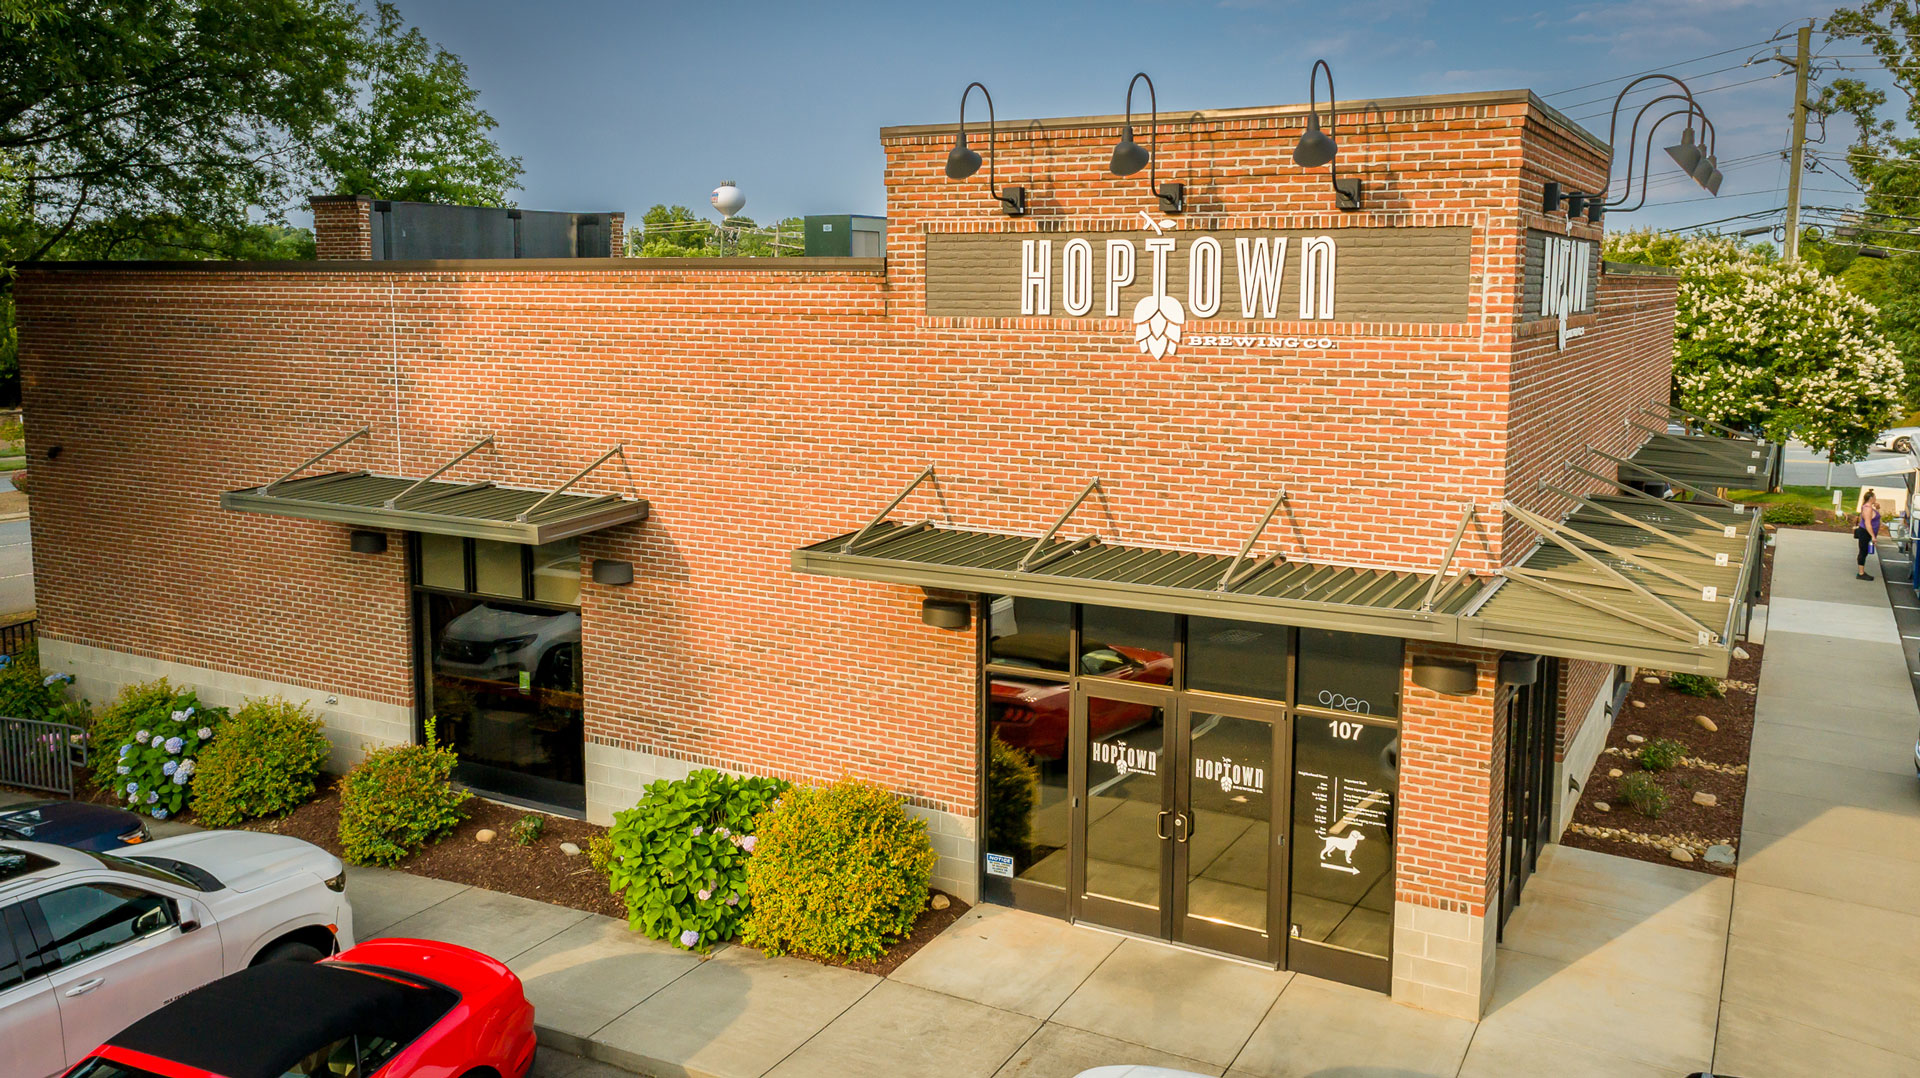 Hoptown-Brewing-Company-Mooresville-NC-303